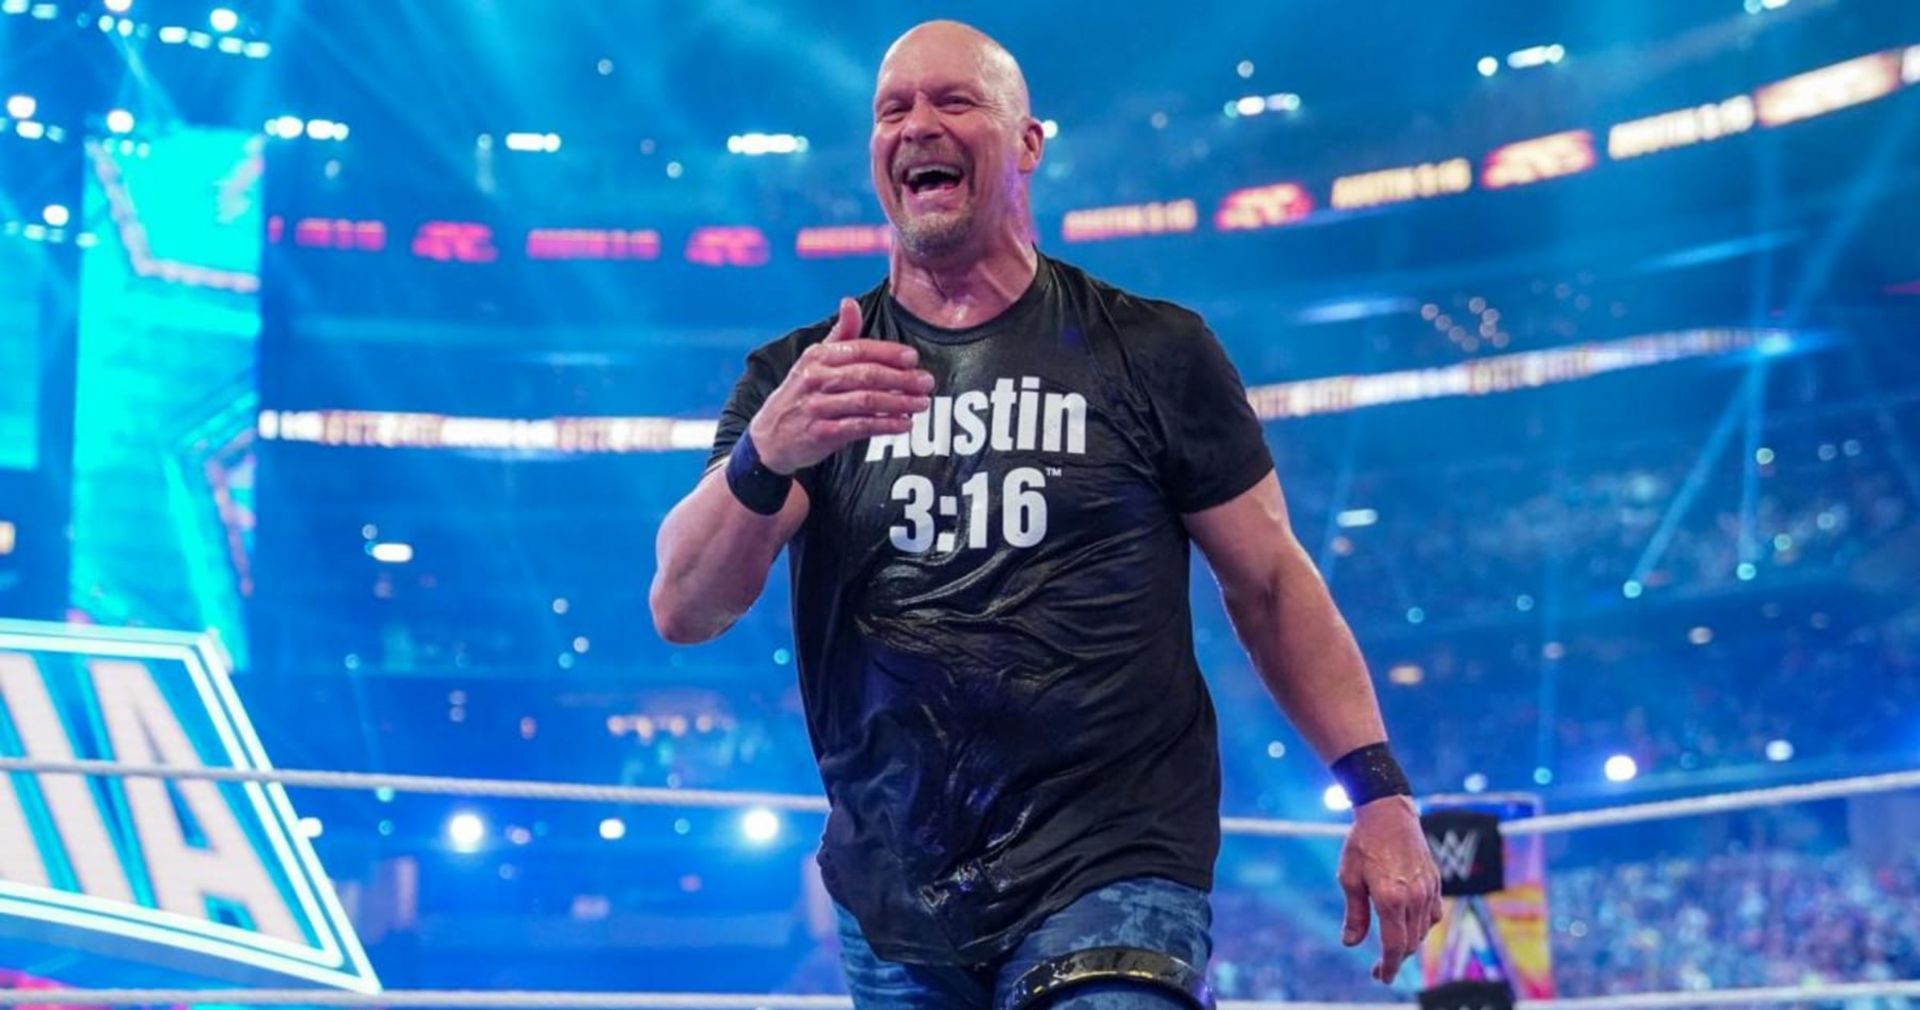 Stone Cold Steve Austin is an influential figure in wrestling